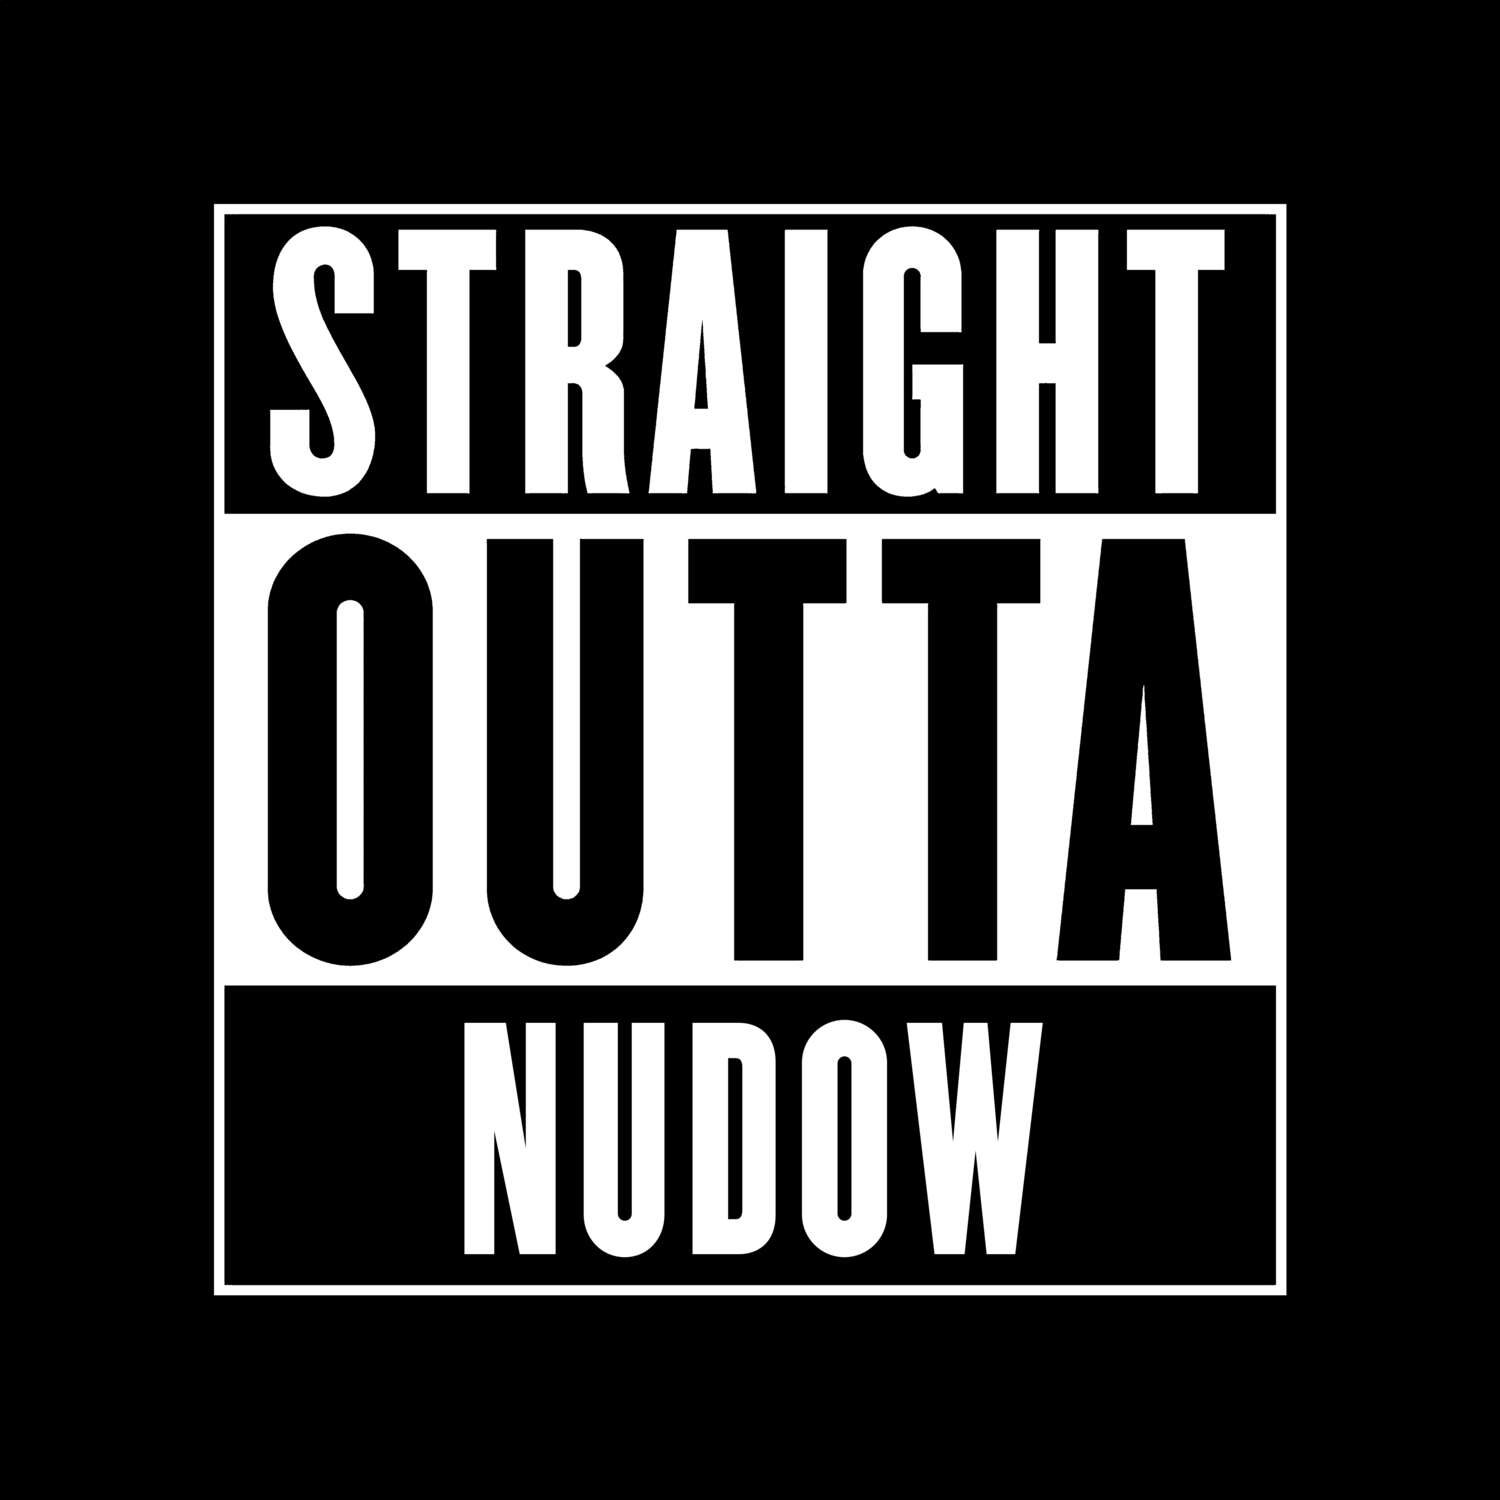 Nudow T-Shirt »Straight Outta«